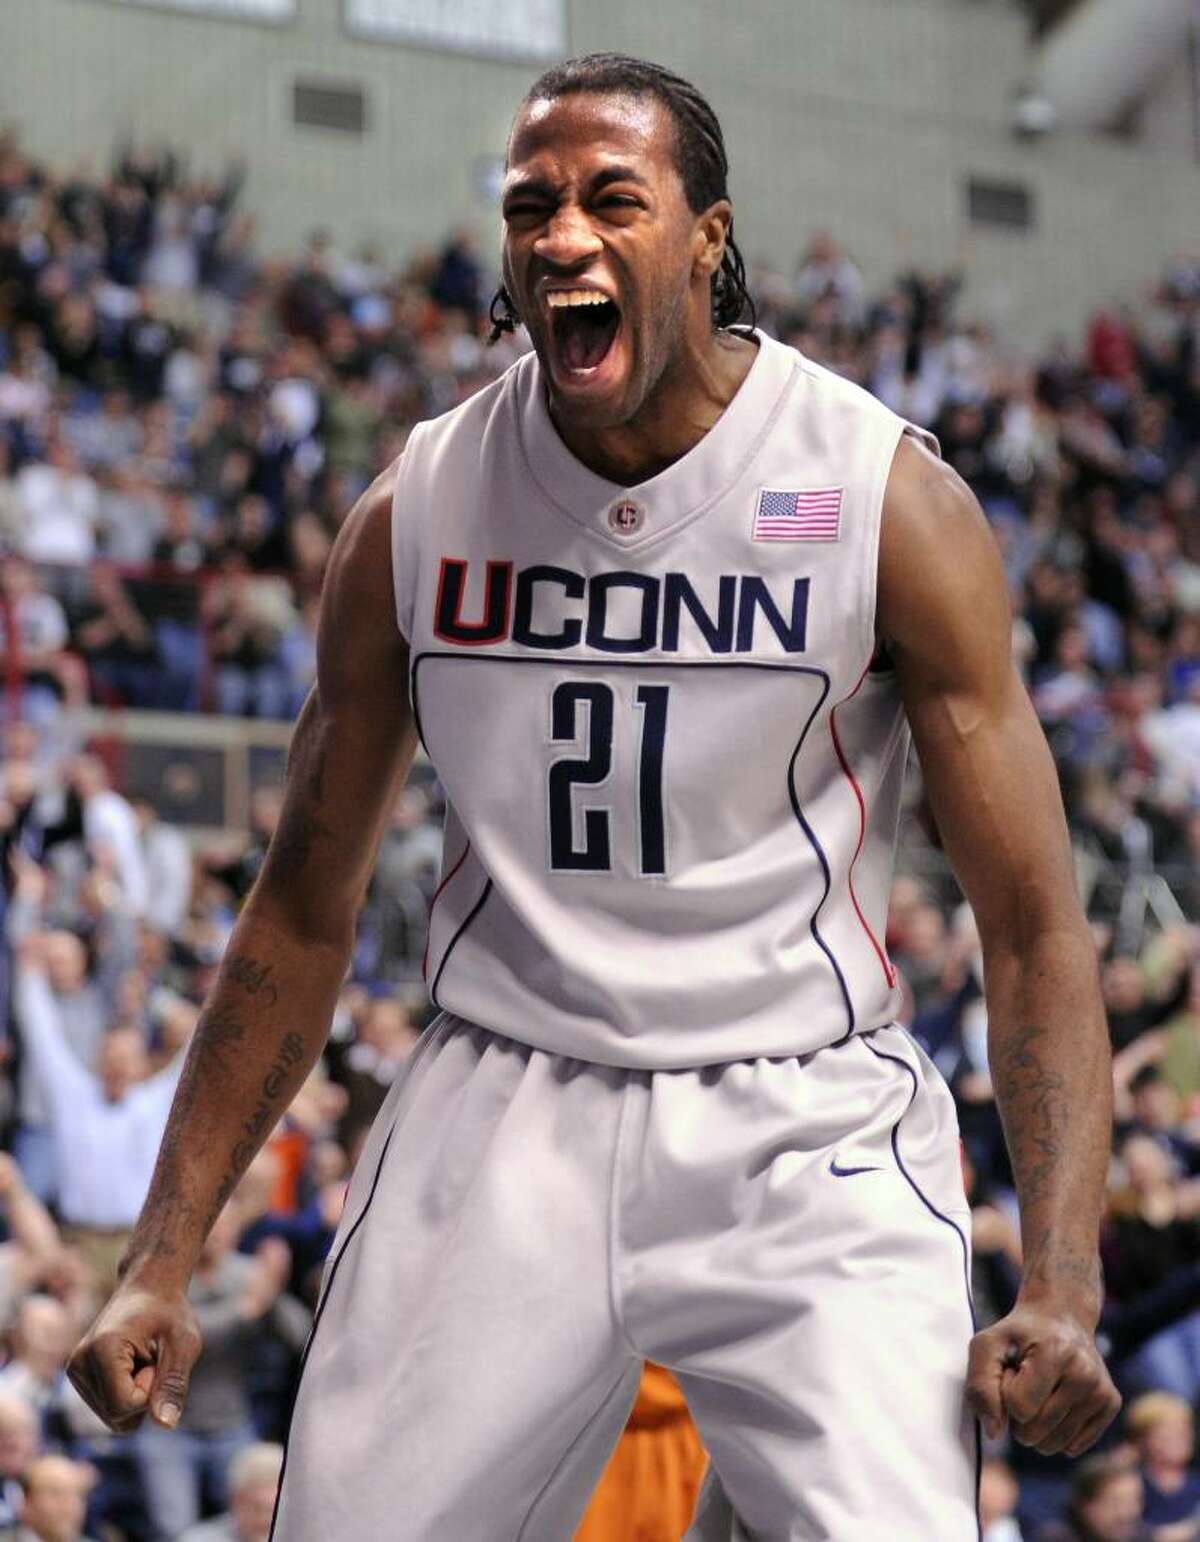 UConn's Stanley Robinson reacts after a dunk in the first half of Saturday's game against Texas at Gampel Pavilion.